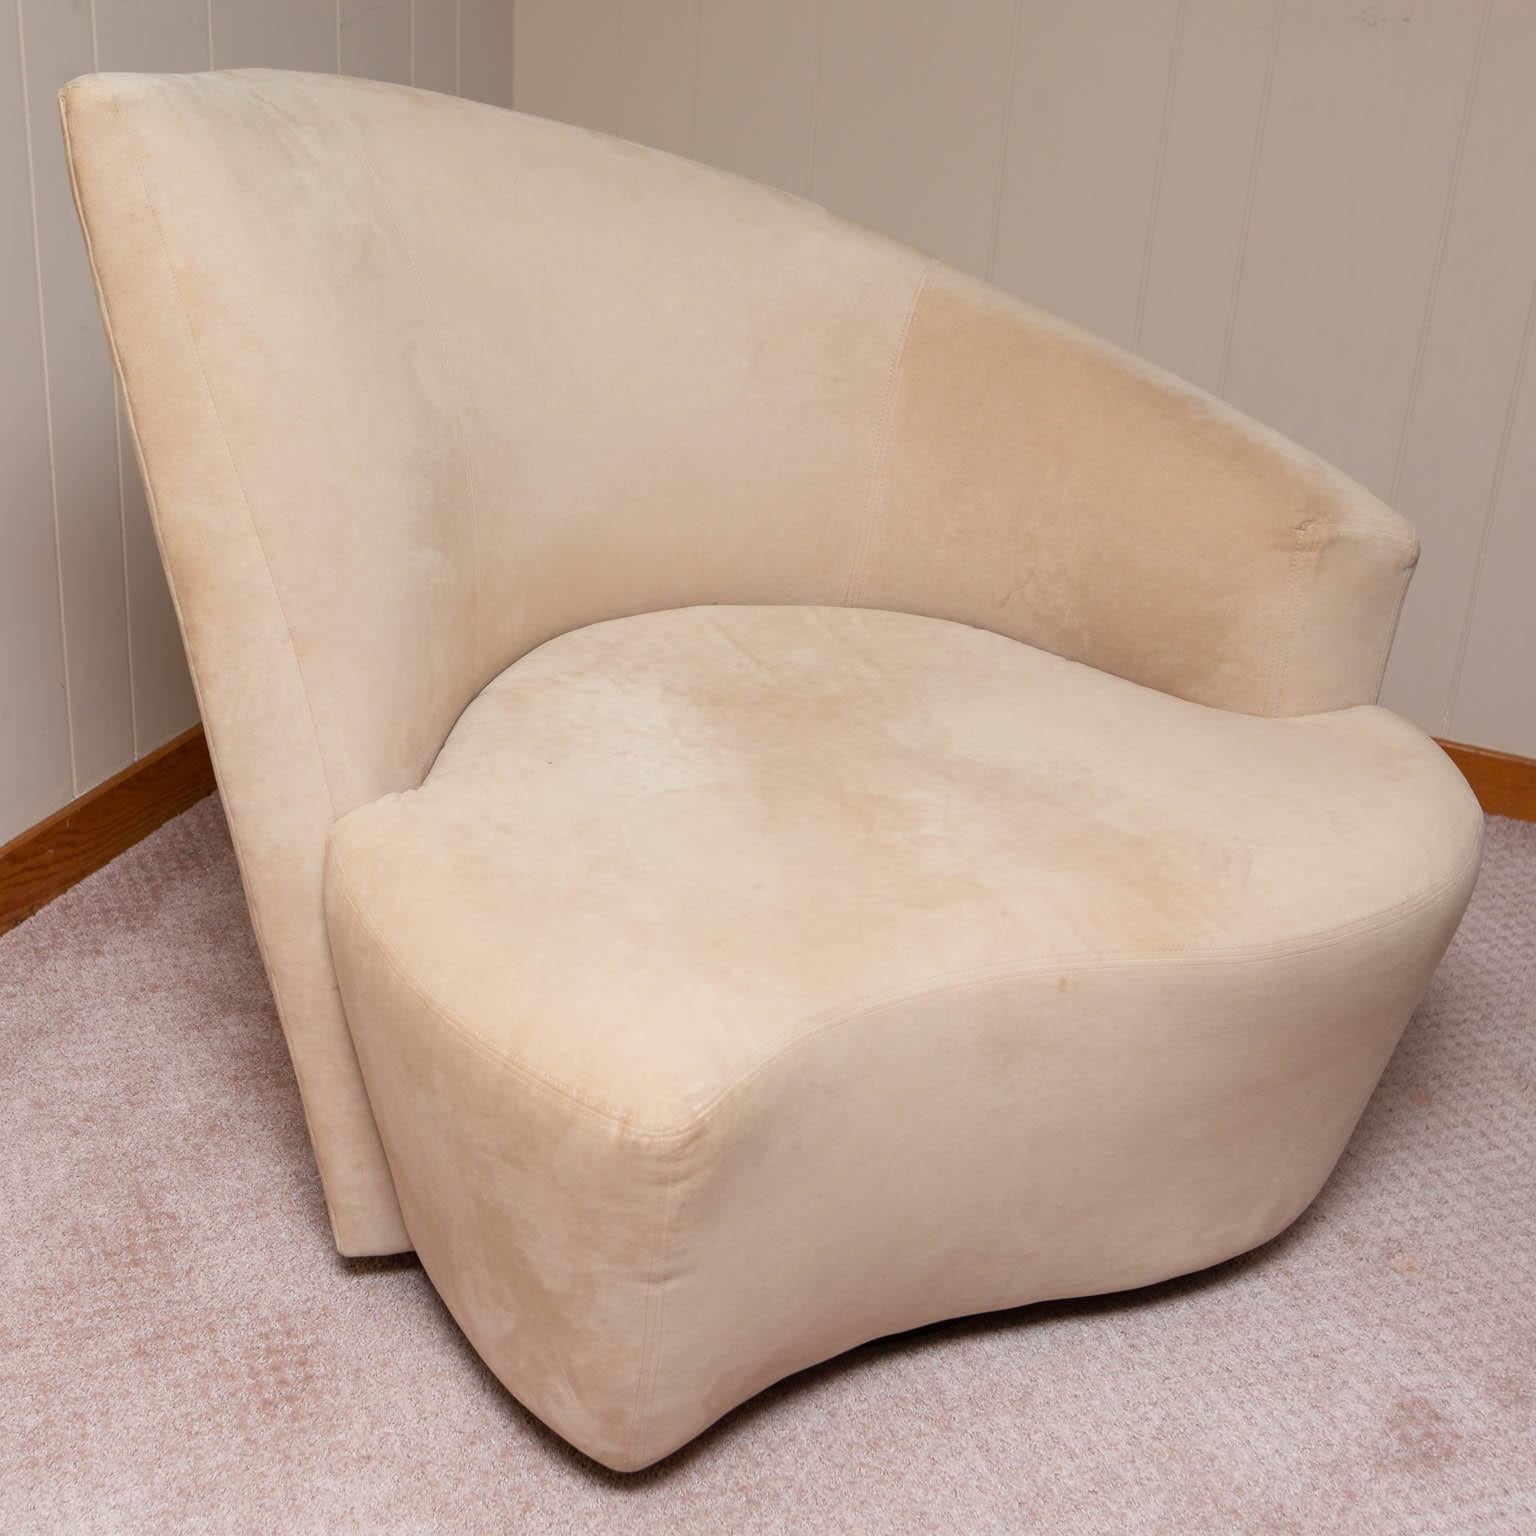 Made by Weiman in the mid-late 1990s, the matching pair of left and right Bilbao swivel chairs are covered in a sandy beige velour.